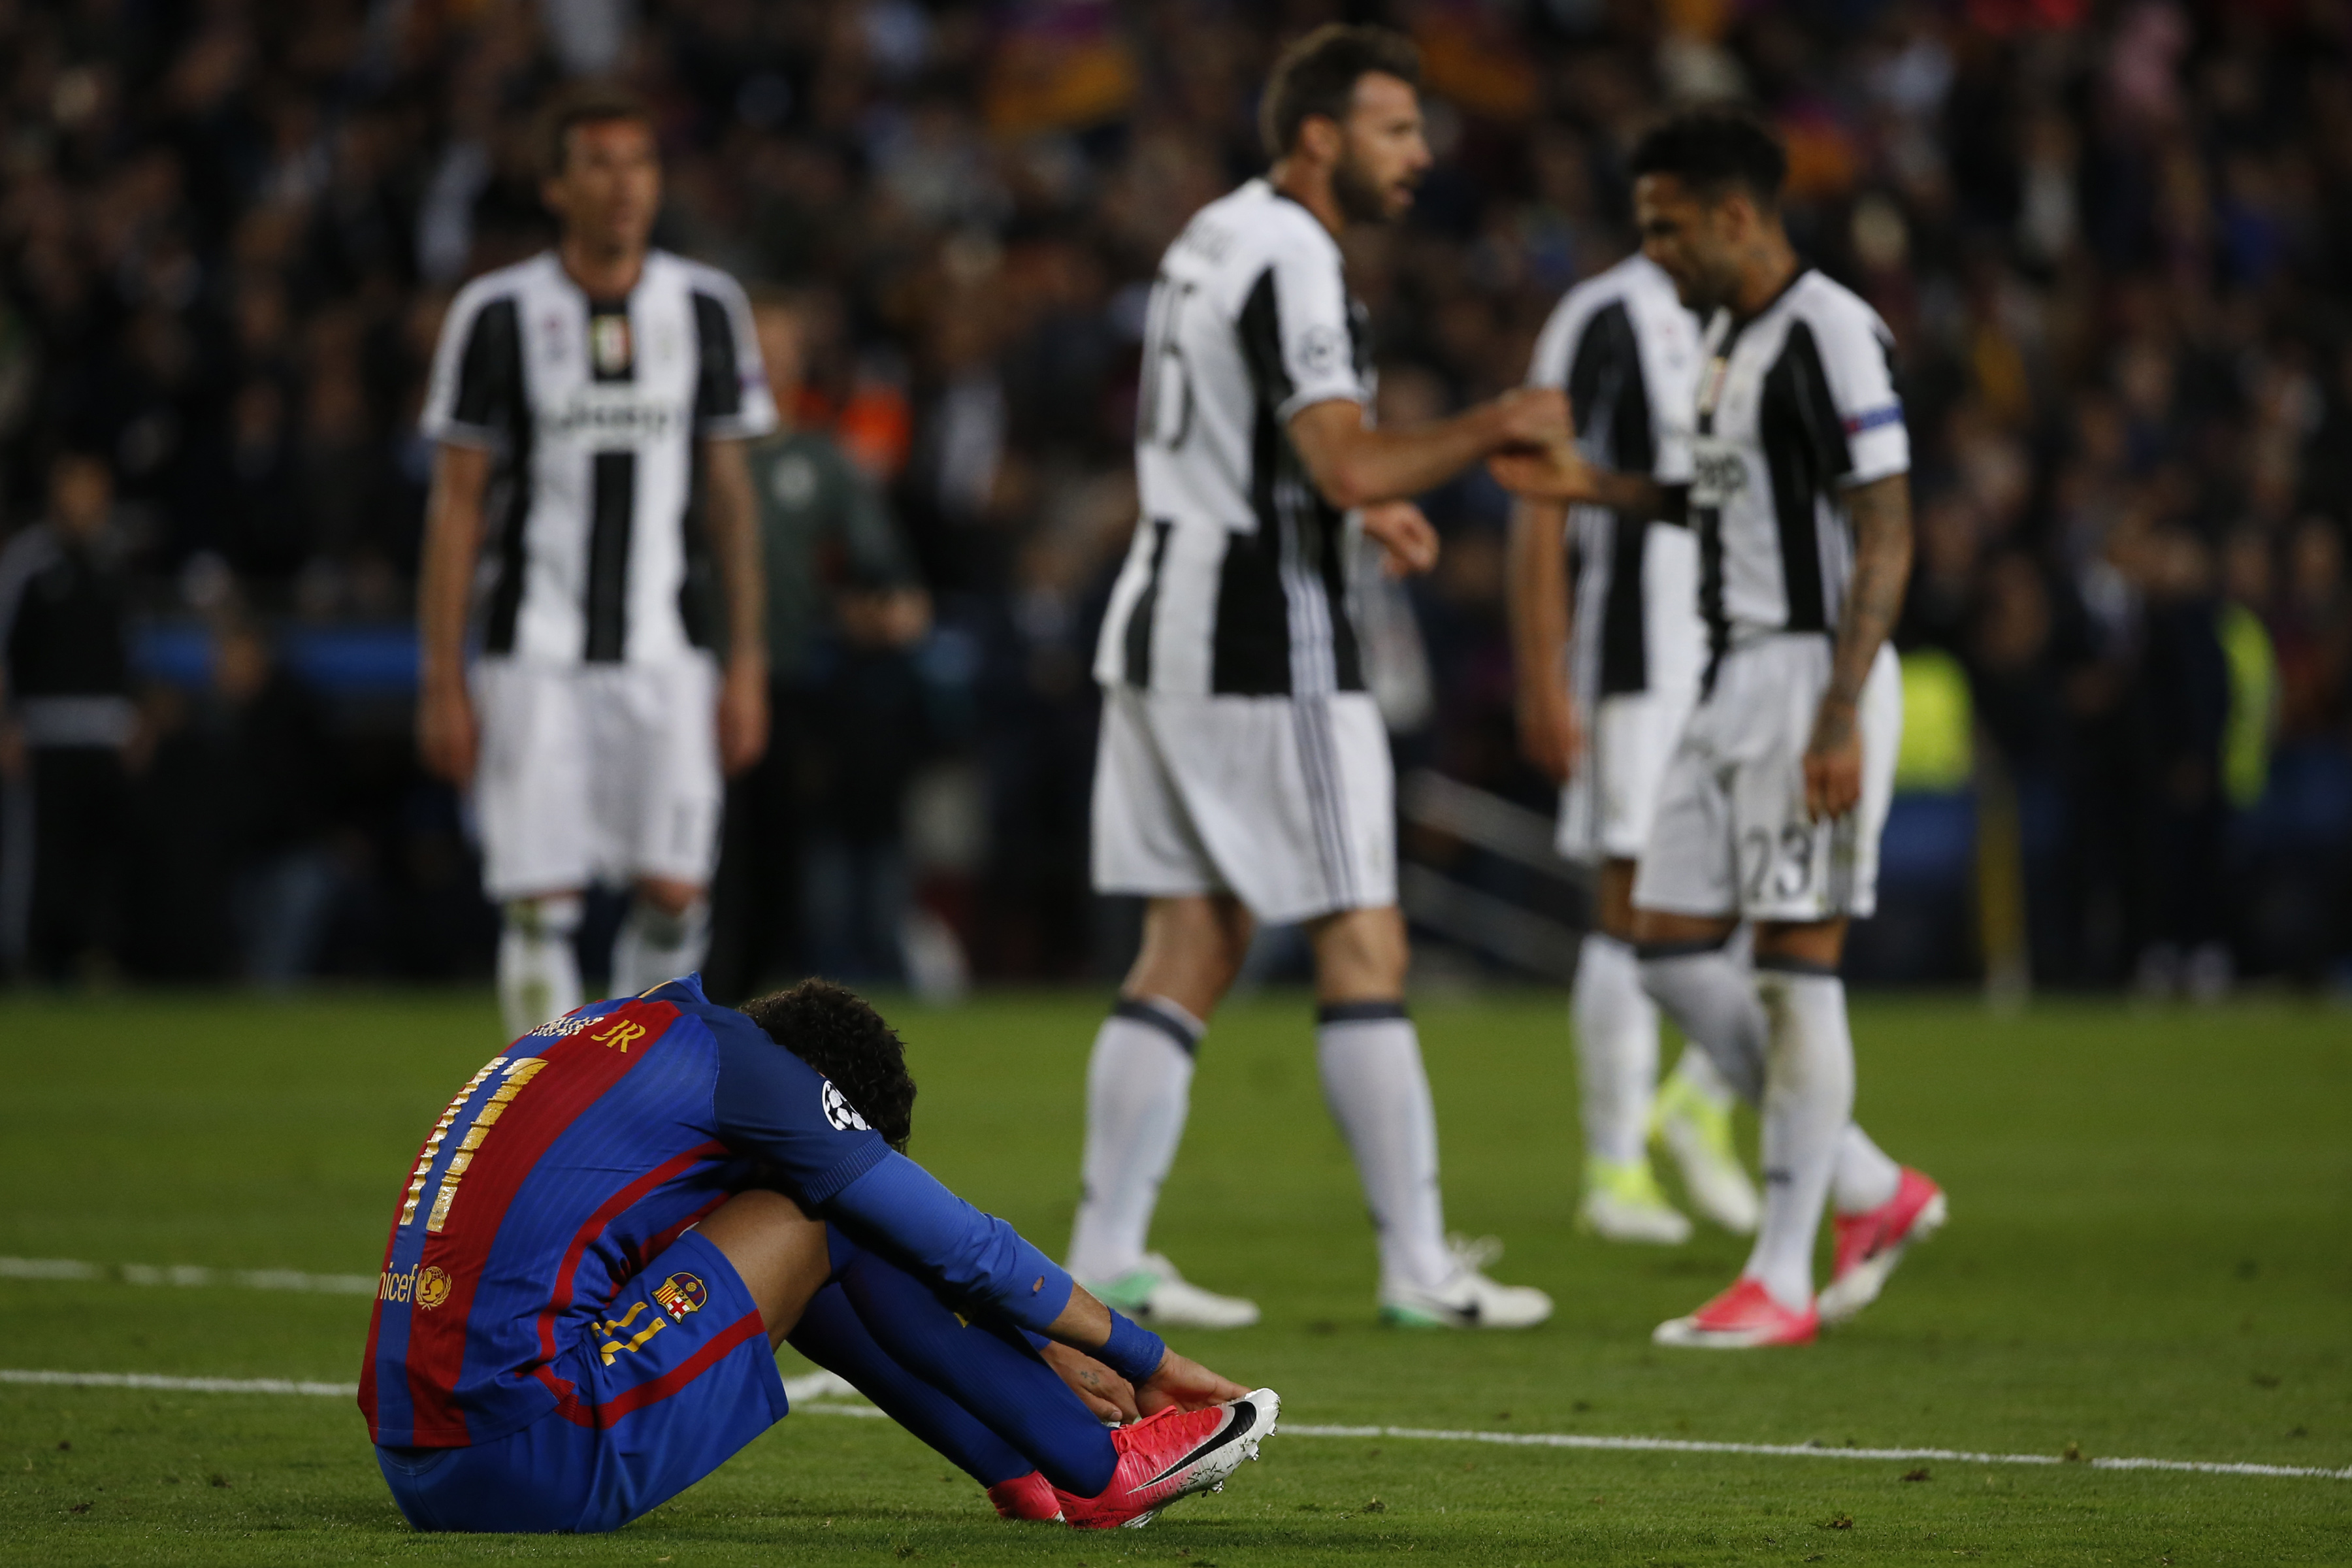 Barcelona's Brazilian forward Neymar sits on the field during the UEFA Champions League quarter-final second leg football match FC Barcelona vs Juventus at the Camp Nou stadium in Barcelona on April 19, 2017. / AFP PHOTO / Marco BERTORELLO        (Photo credit should read MARCO BERTORELLO/AFP/Getty Images)